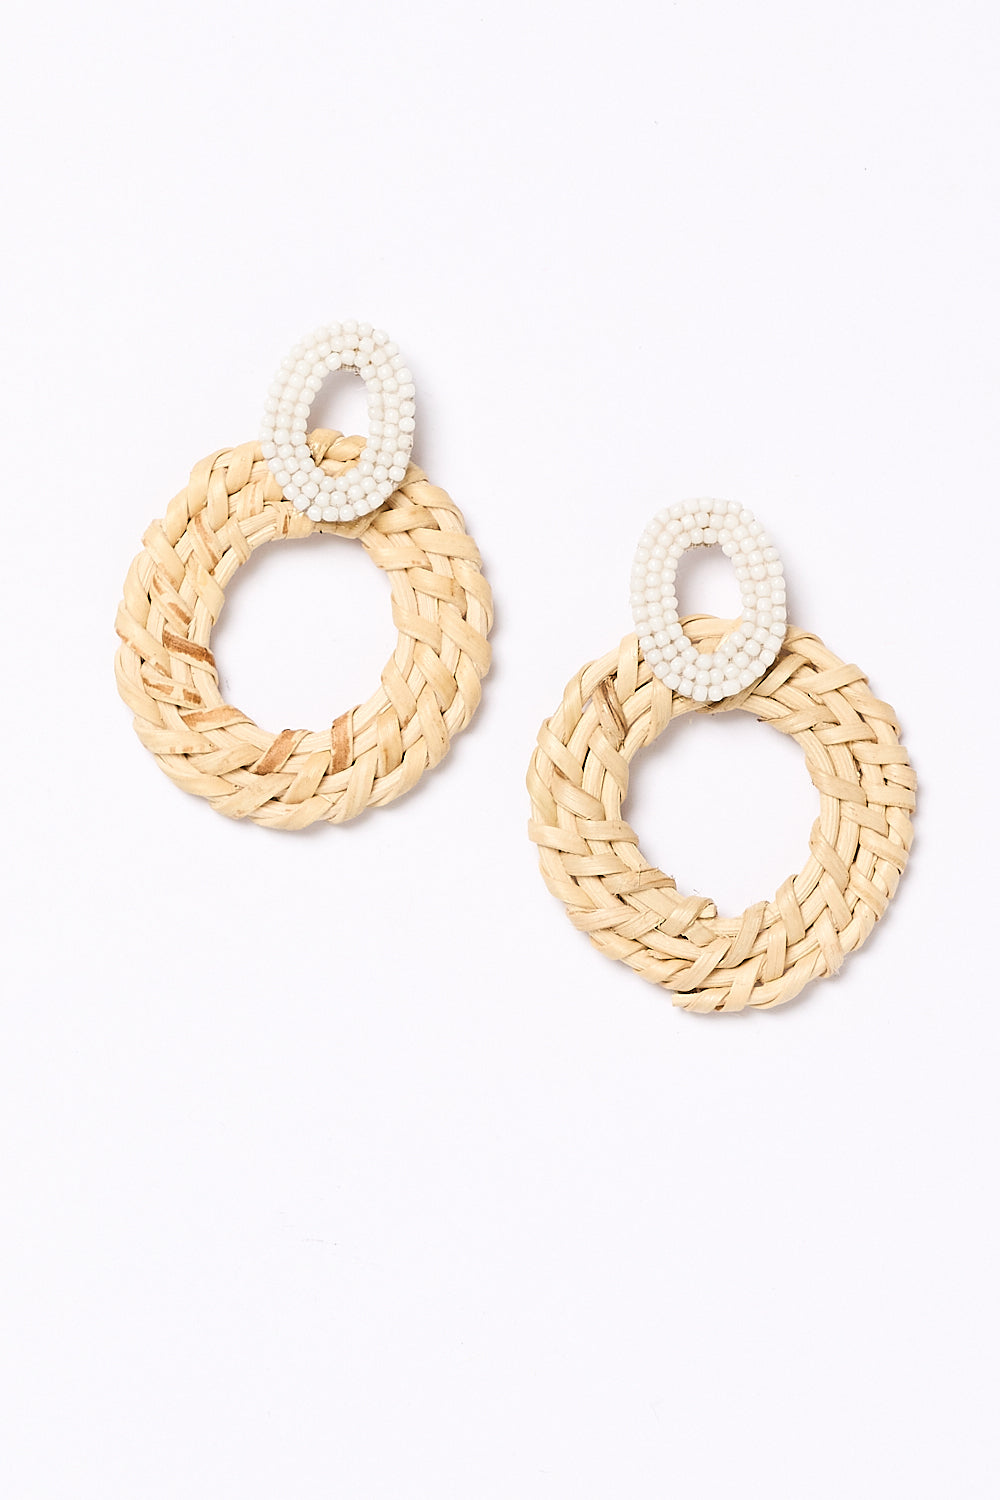 Beaded Circle Weave Earrings in White and Natural